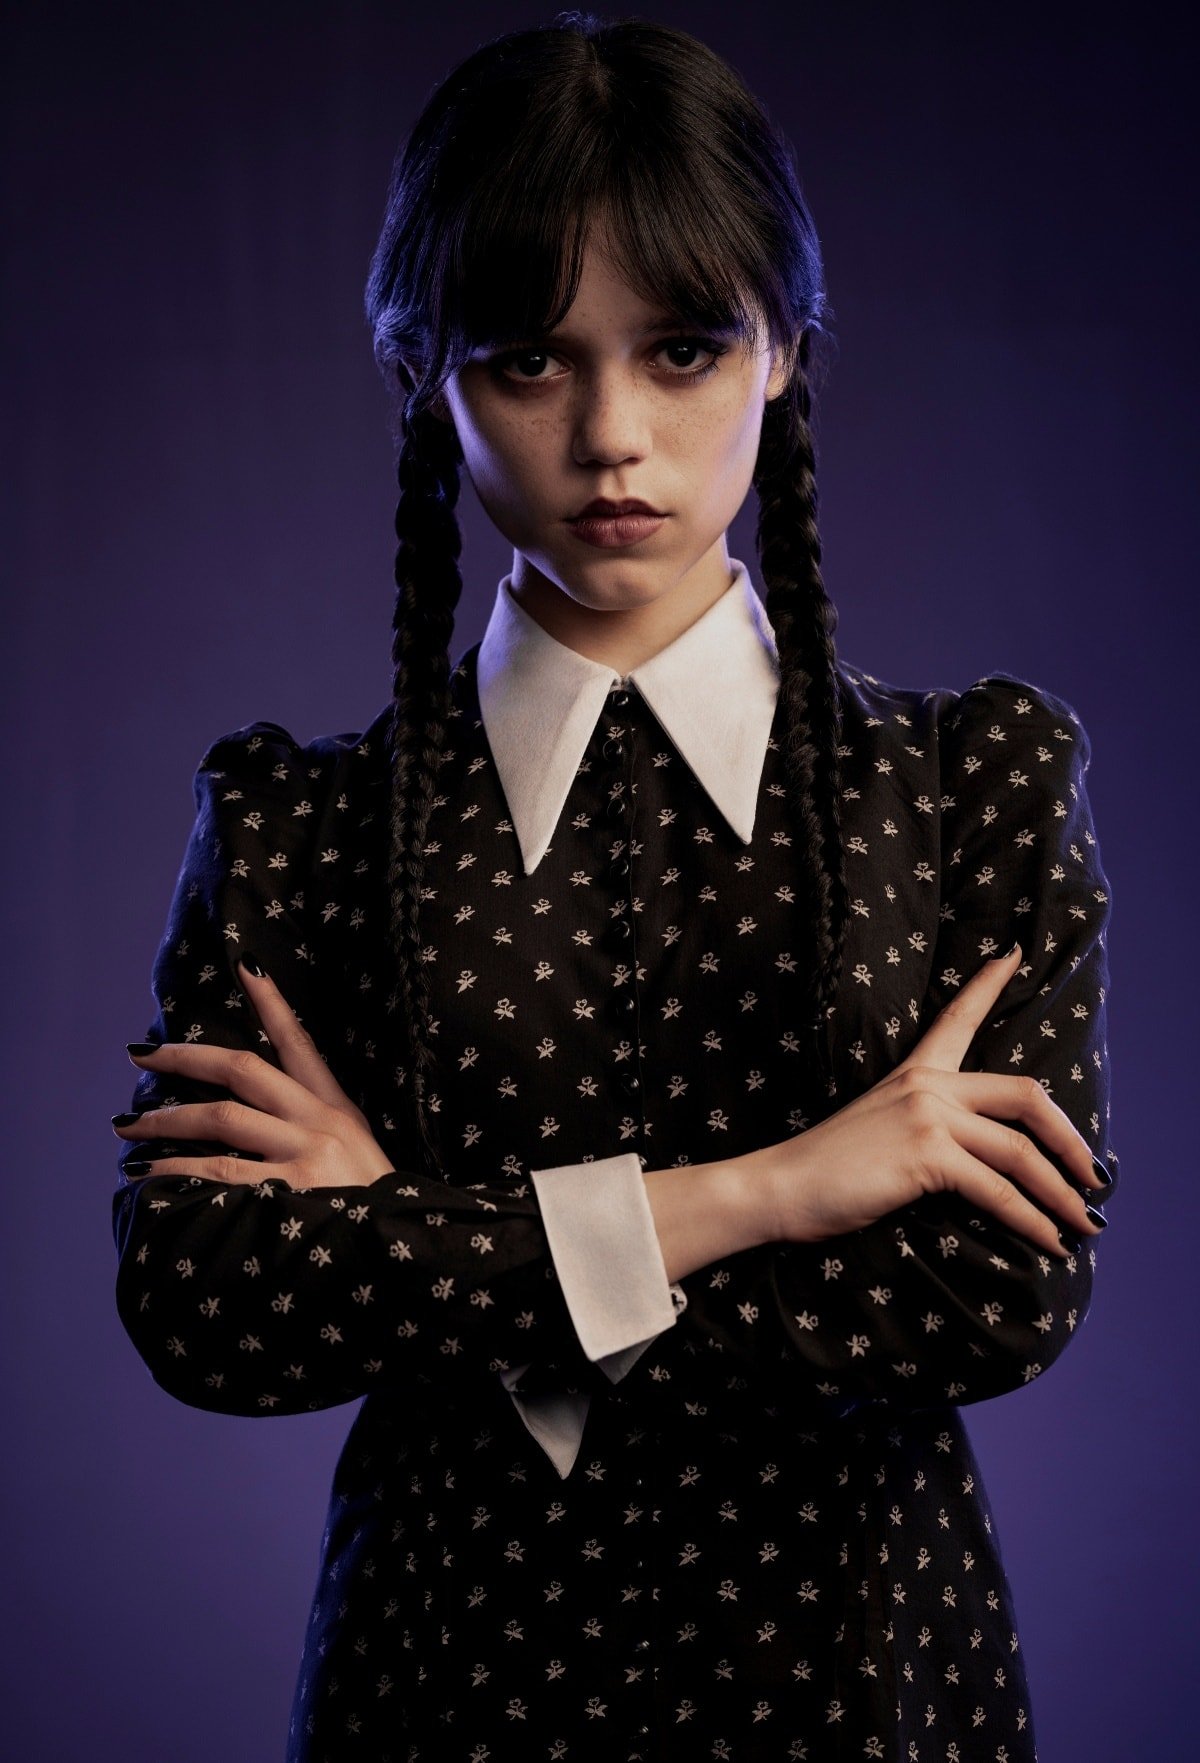 The delightfully macabre Netflix series, Wednesday, stars Jenna Ortega in the lead role as Wednesday Addams